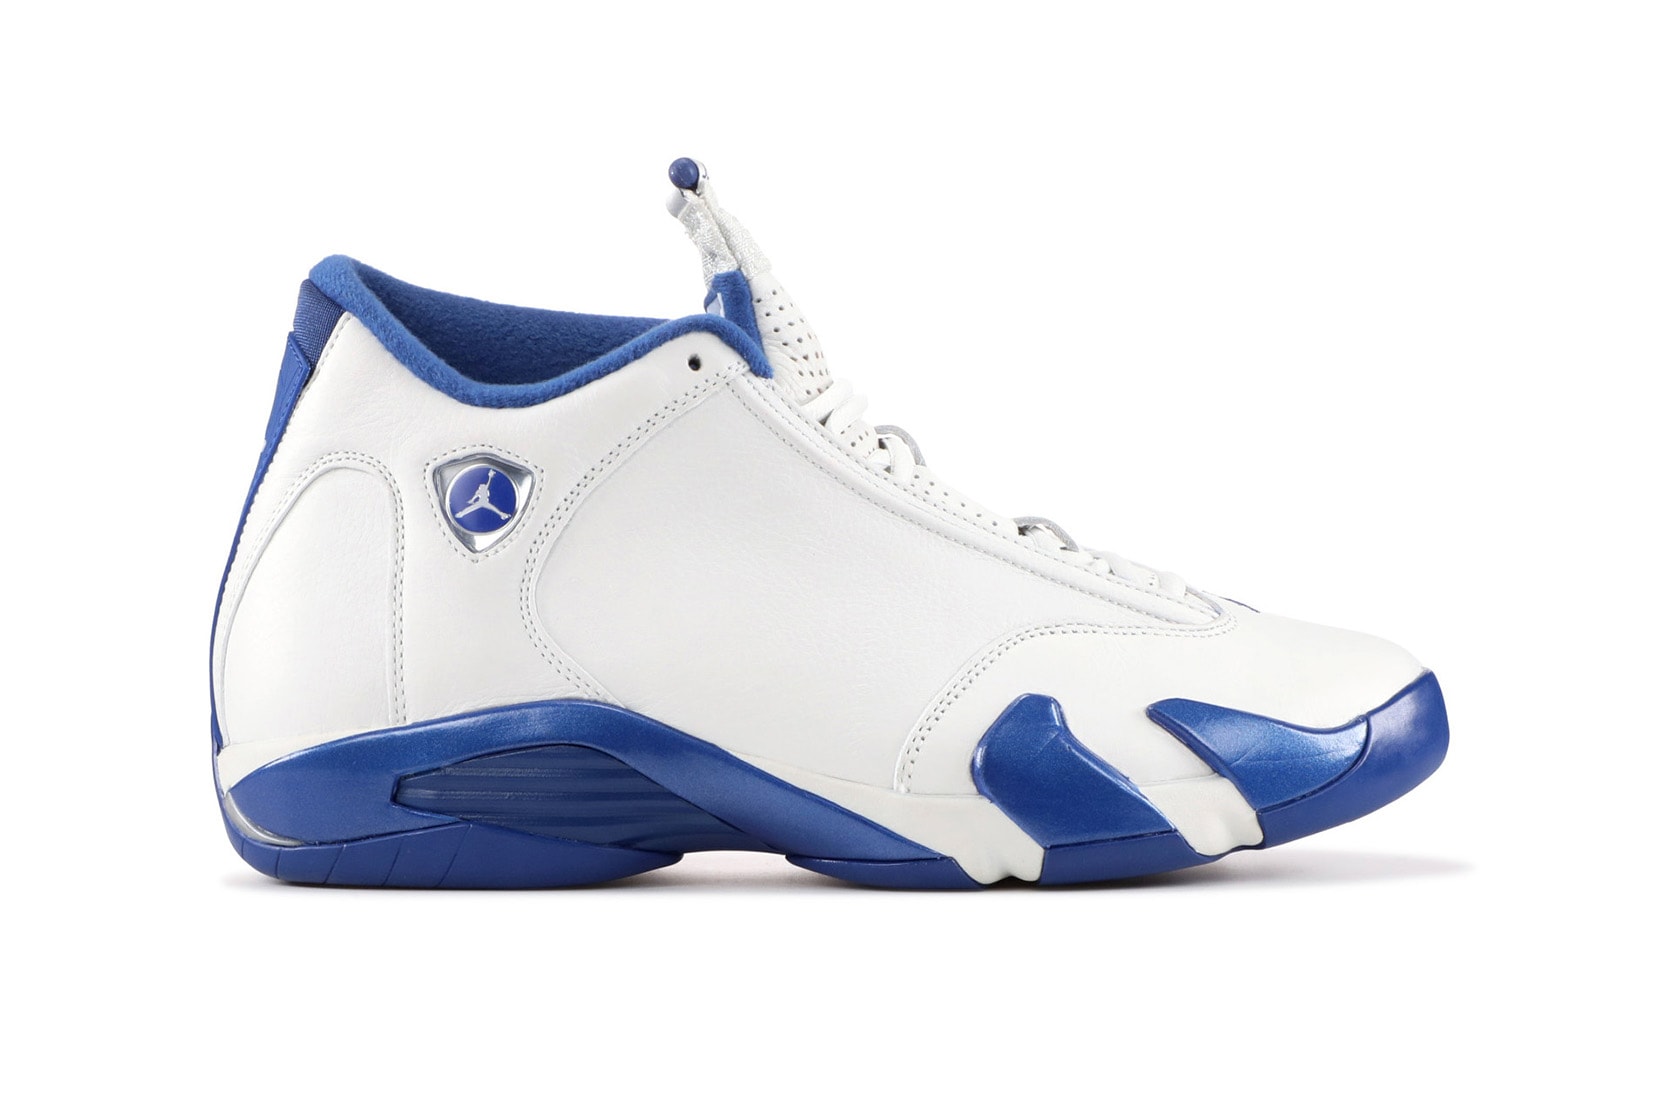 Drake OVO x Air Jordan 14 "Kentucky" PE For Sale $25,000 USD Flight Club Shoes Kicks Trainers Sneakers Cop Buy Purchase Available In-Stock Now Unreleased Never-Seen-Before